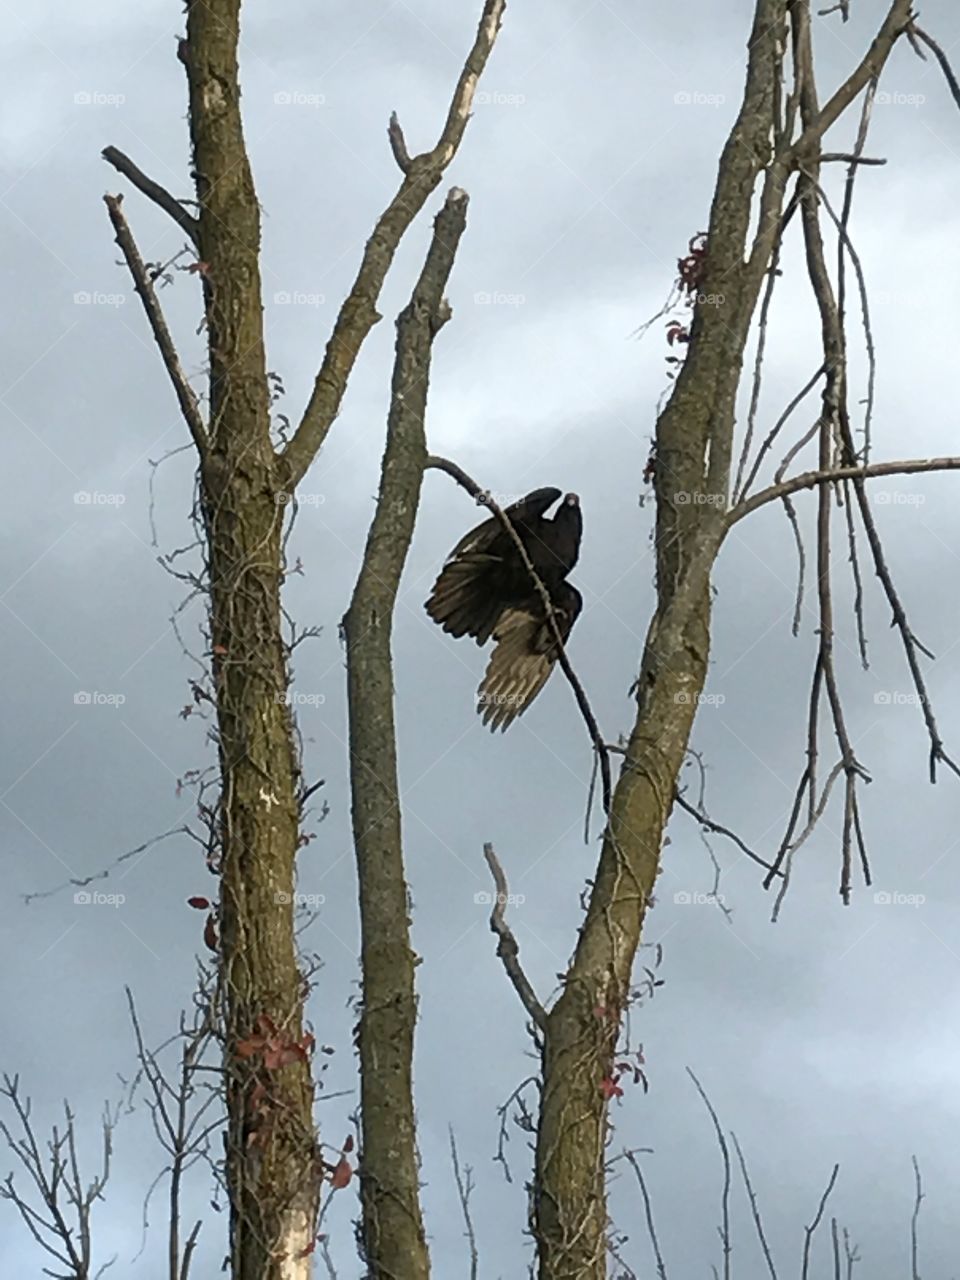 Turkey vulture looking straight down at me